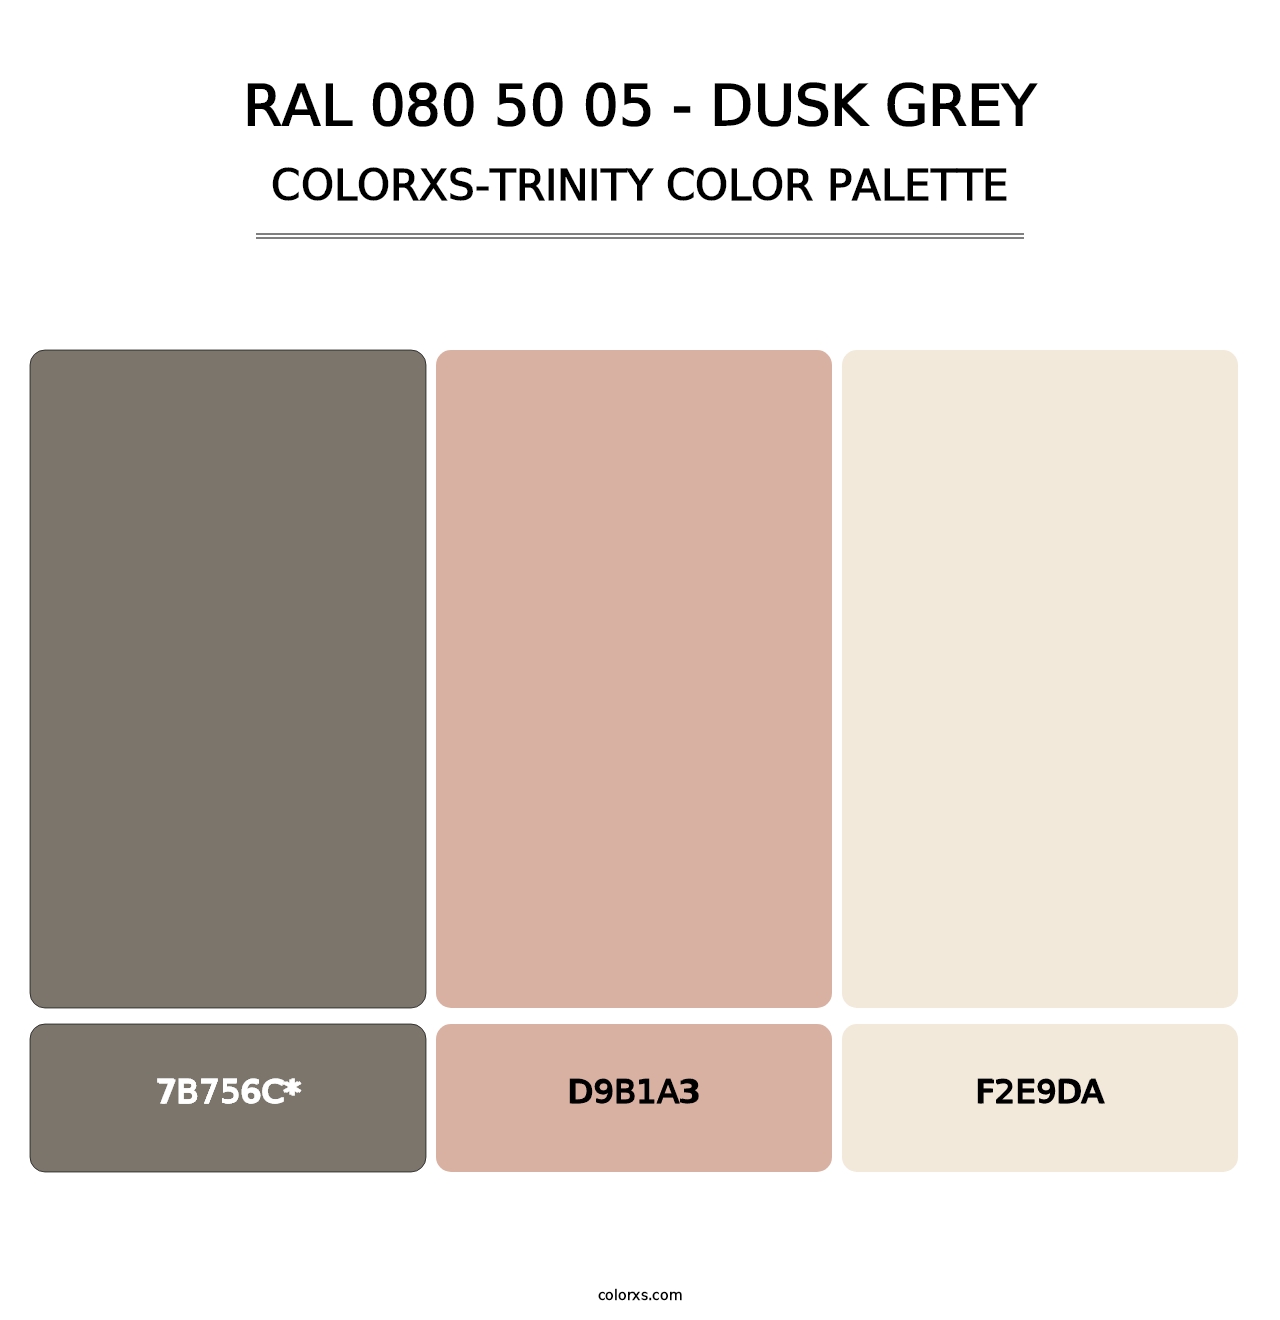 RAL 080 50 05 - Dusk Grey - Colorxs Trinity Palette